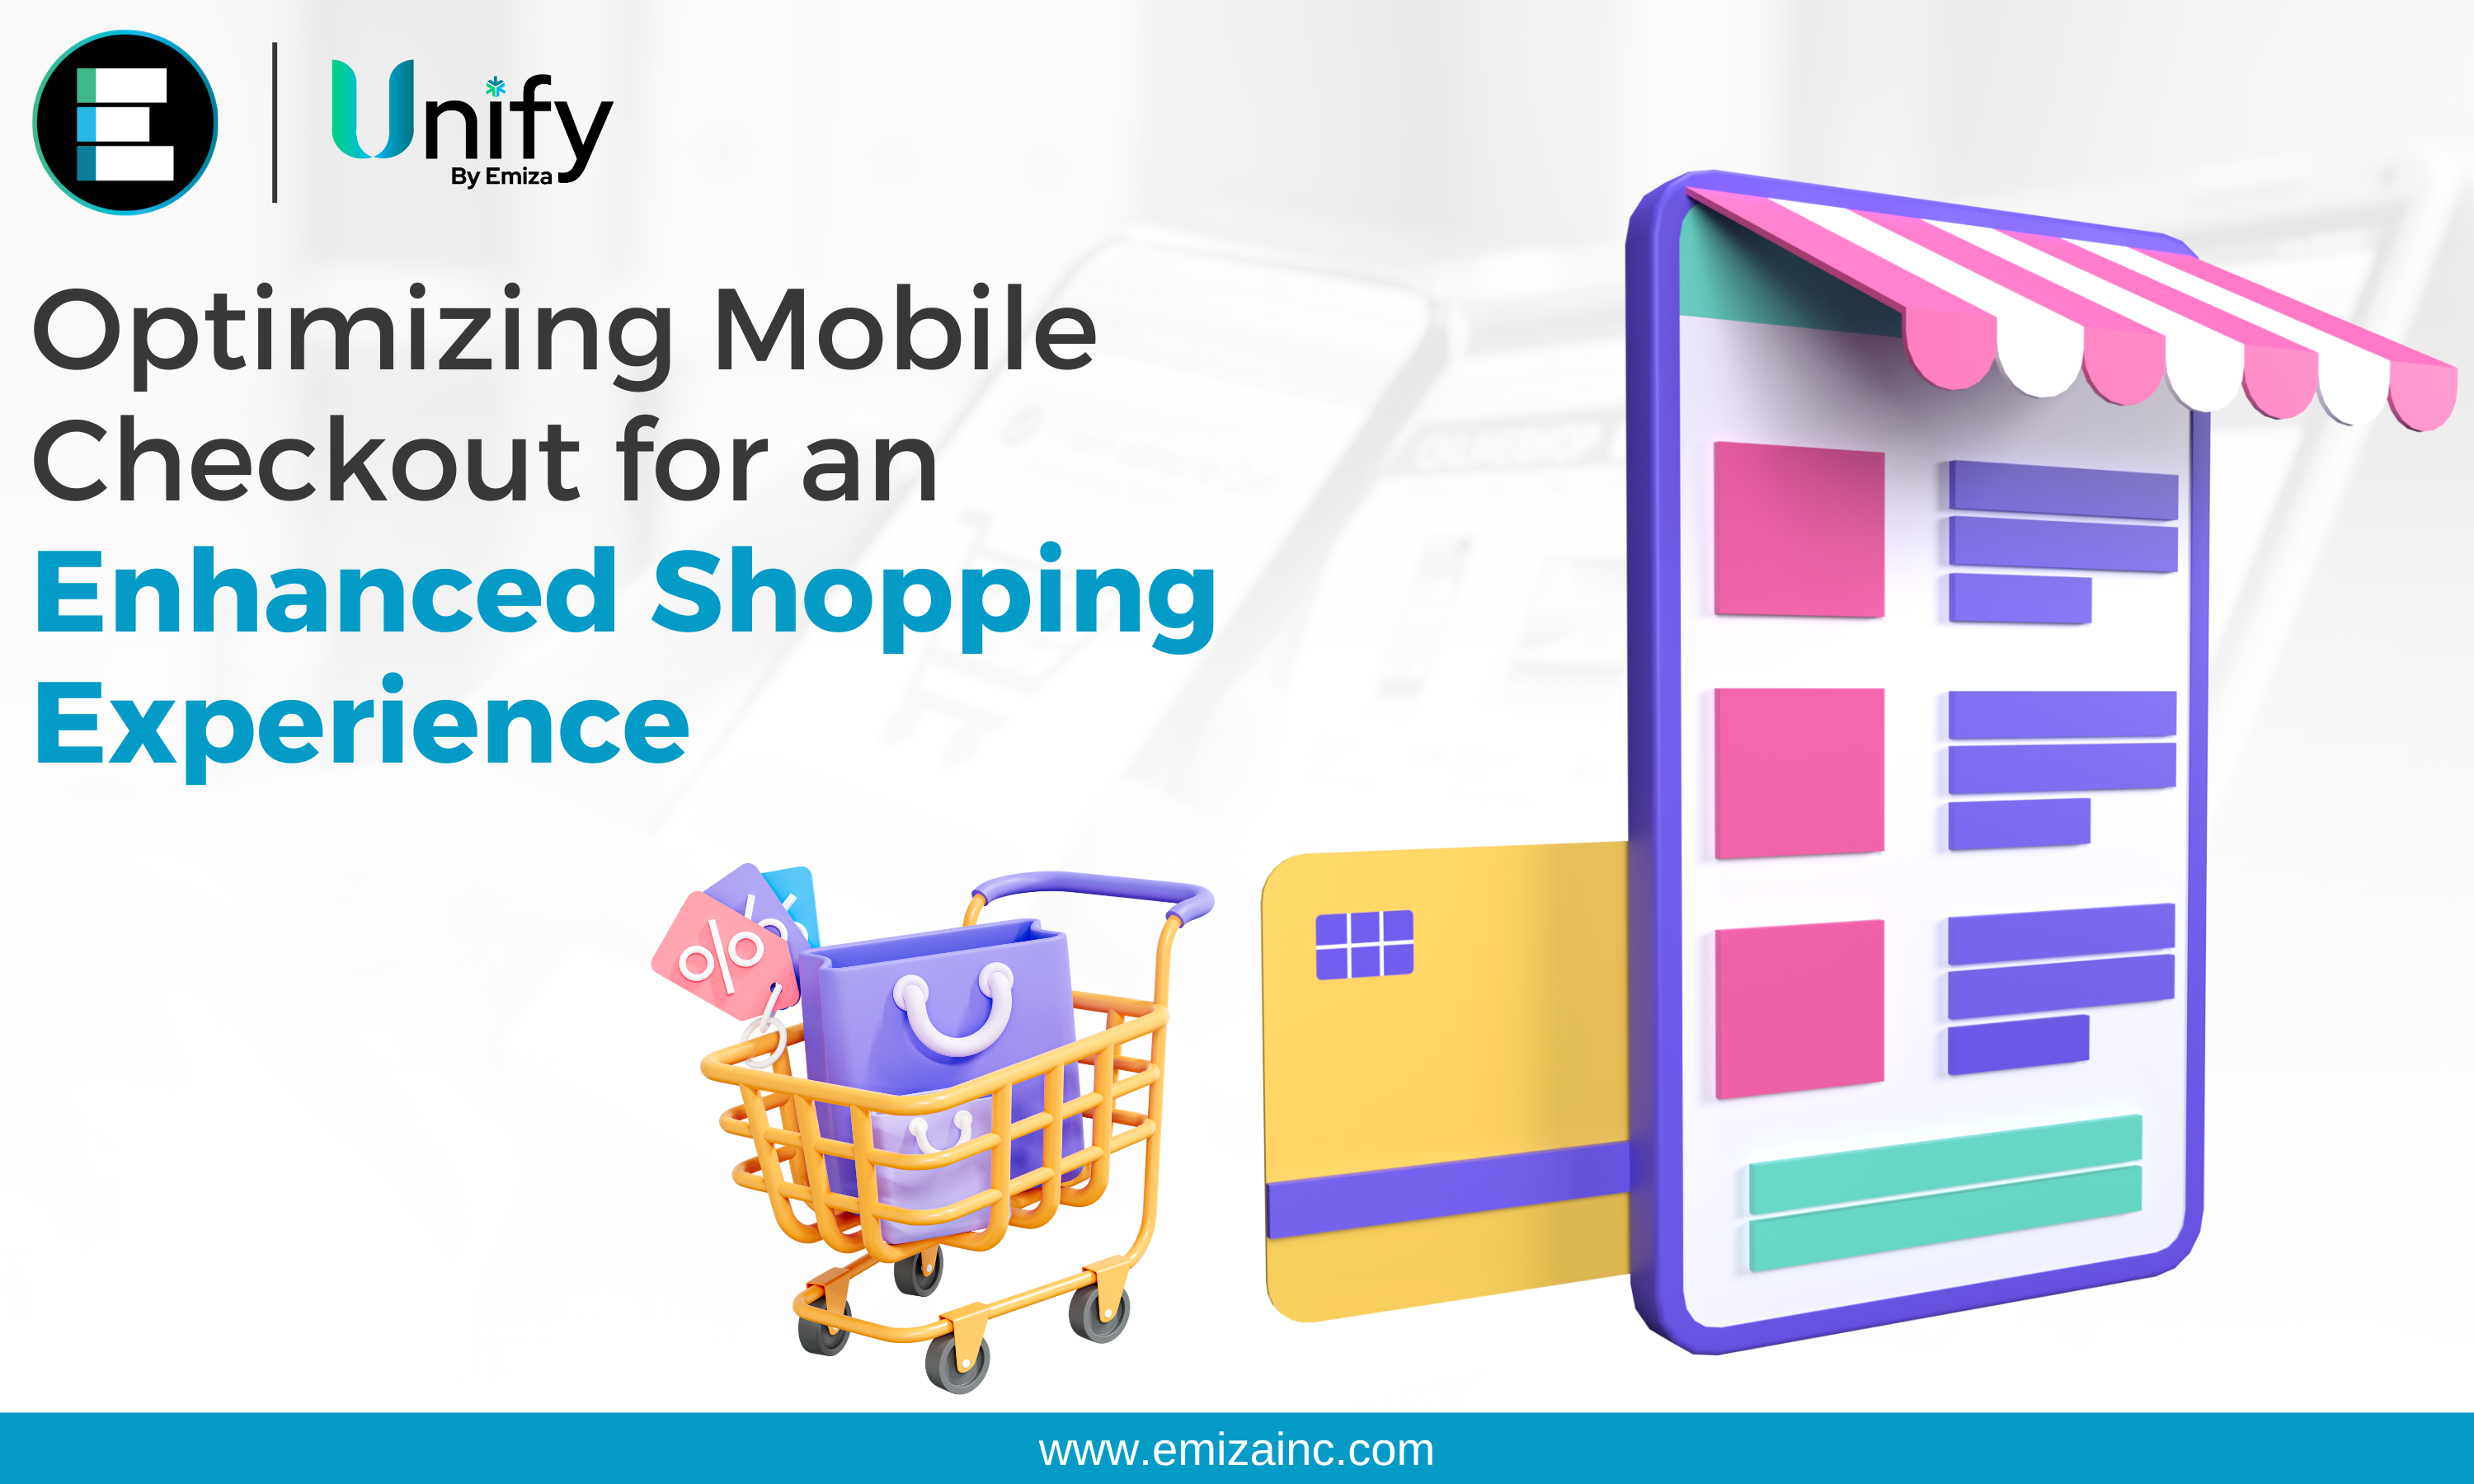 Optimizing Mobile Checkout for an Enhanced Shopping Experience